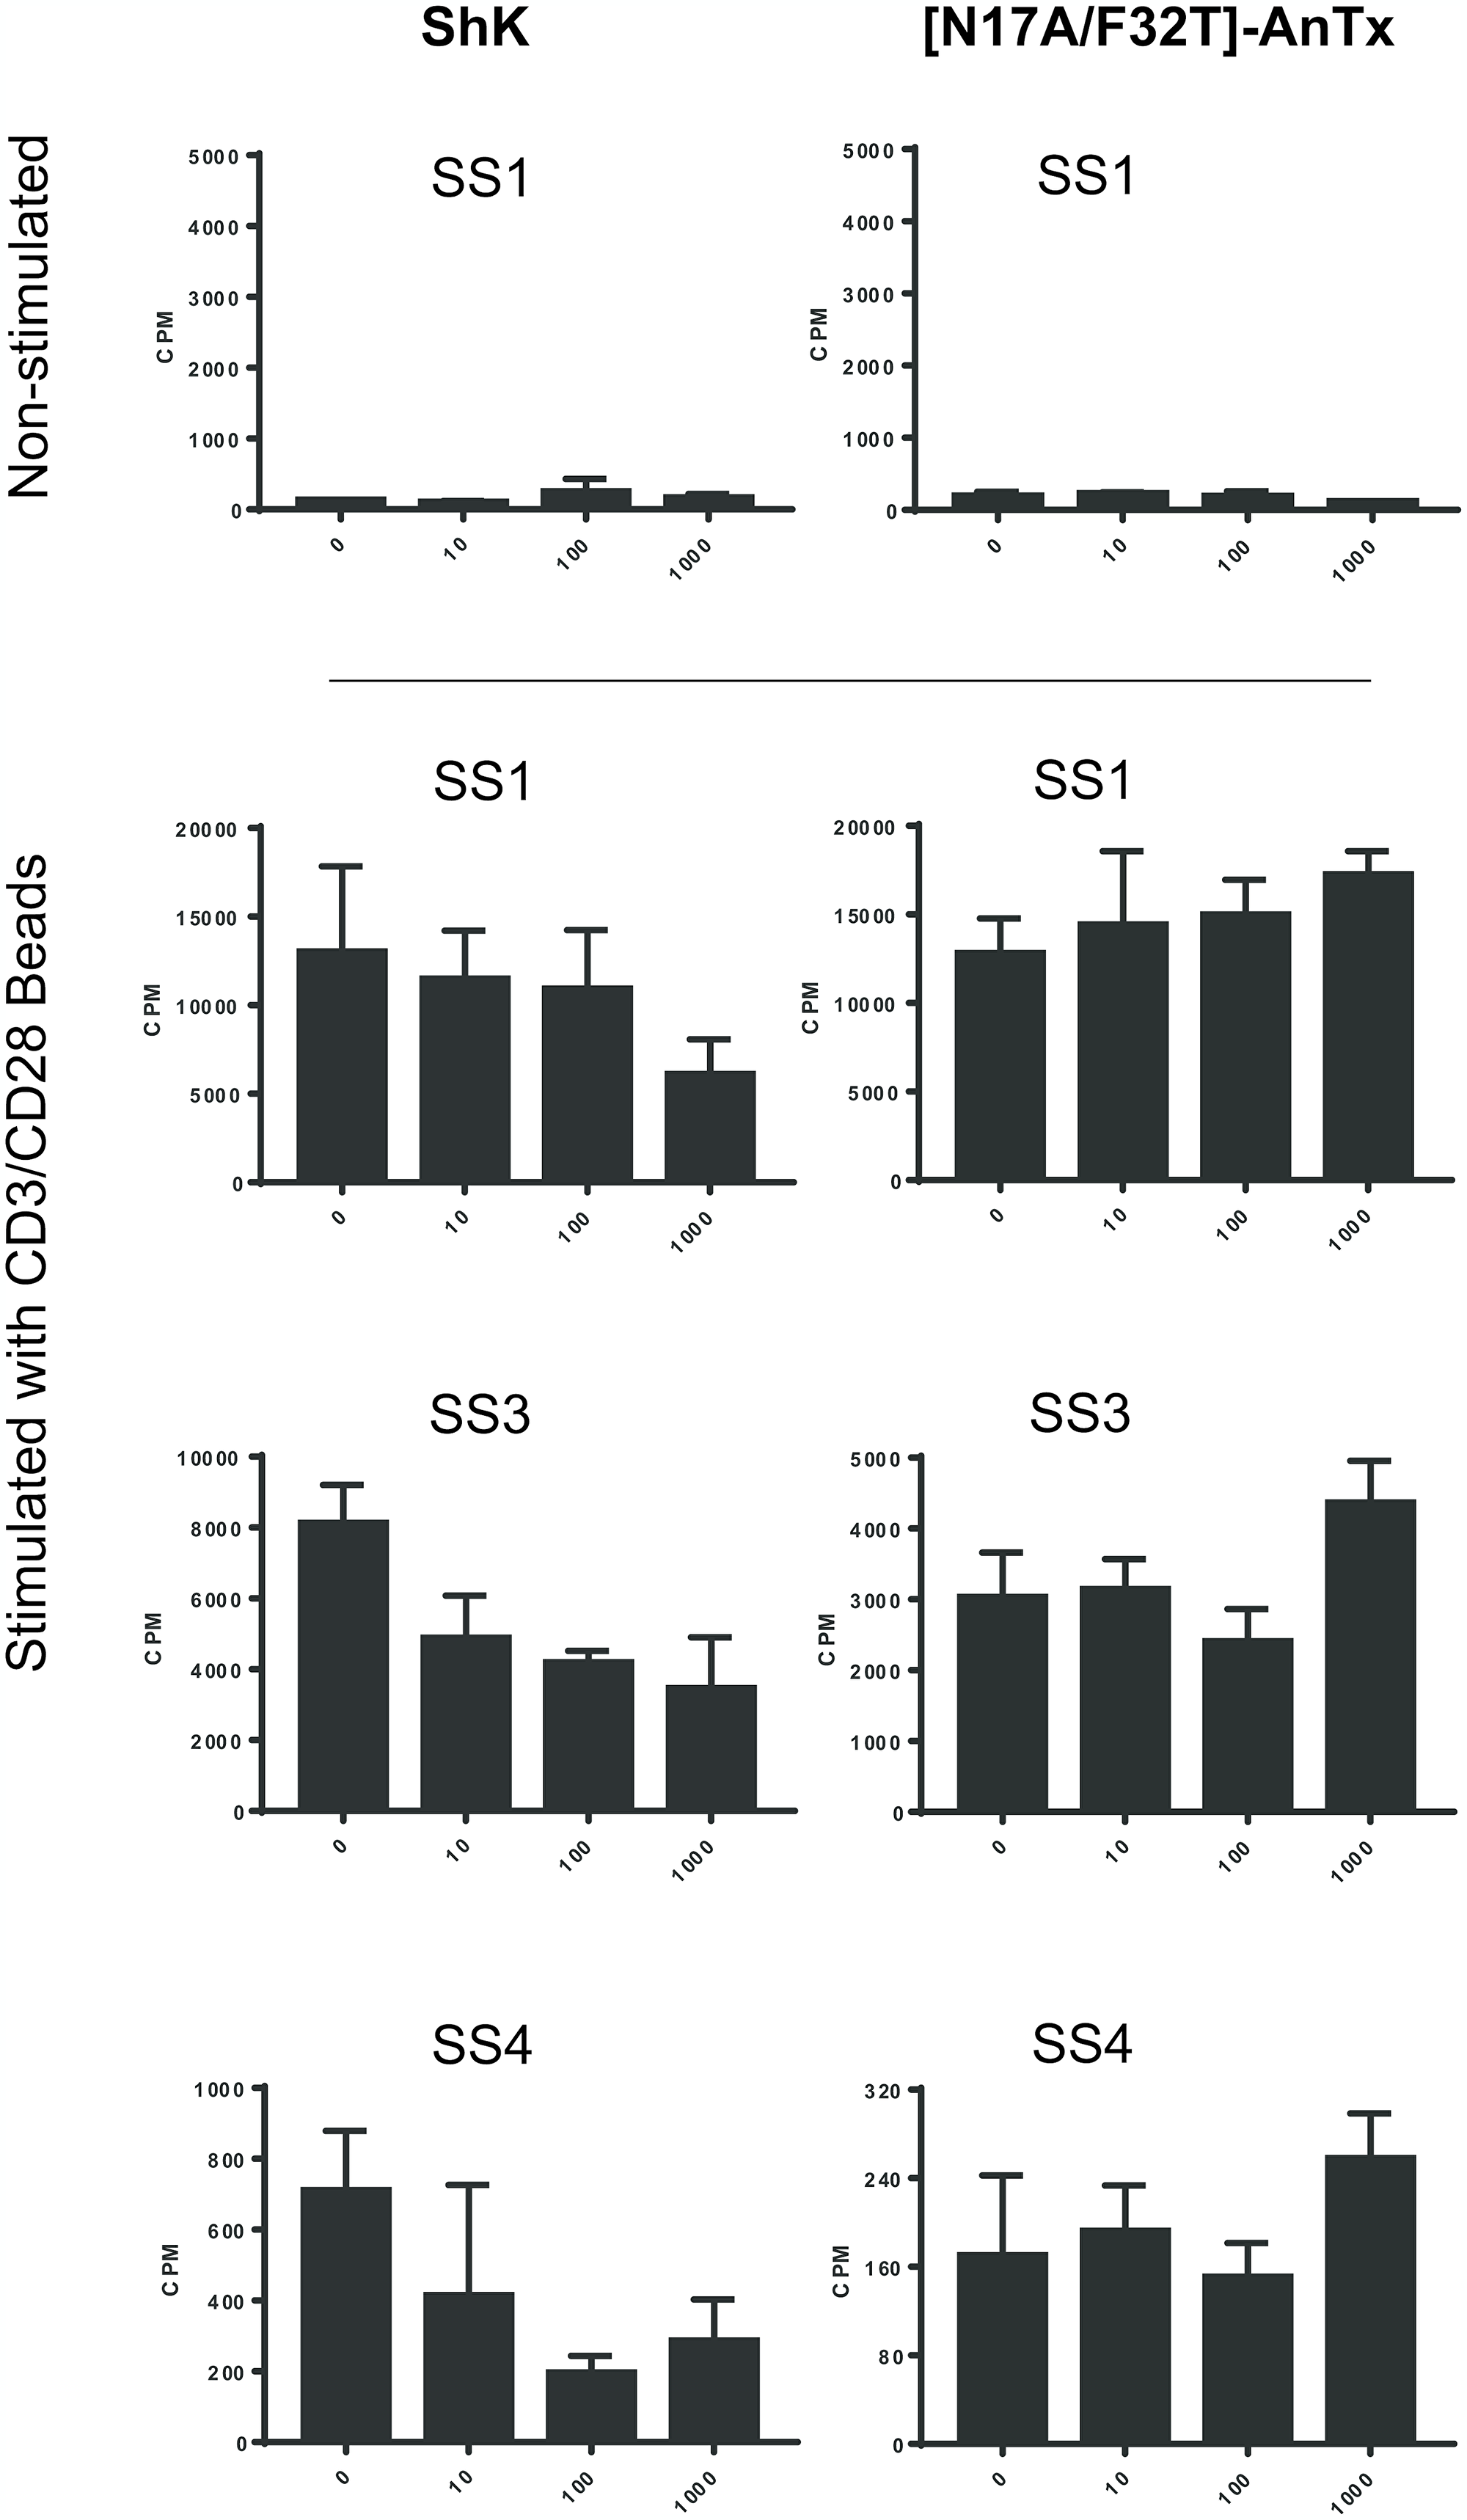 Kv1.3 inhibitor ShK inhibits activation-induced proliferation of PBMCs from SS patients, whereas [N17A/F32T]-AnTx shows little inhibition.